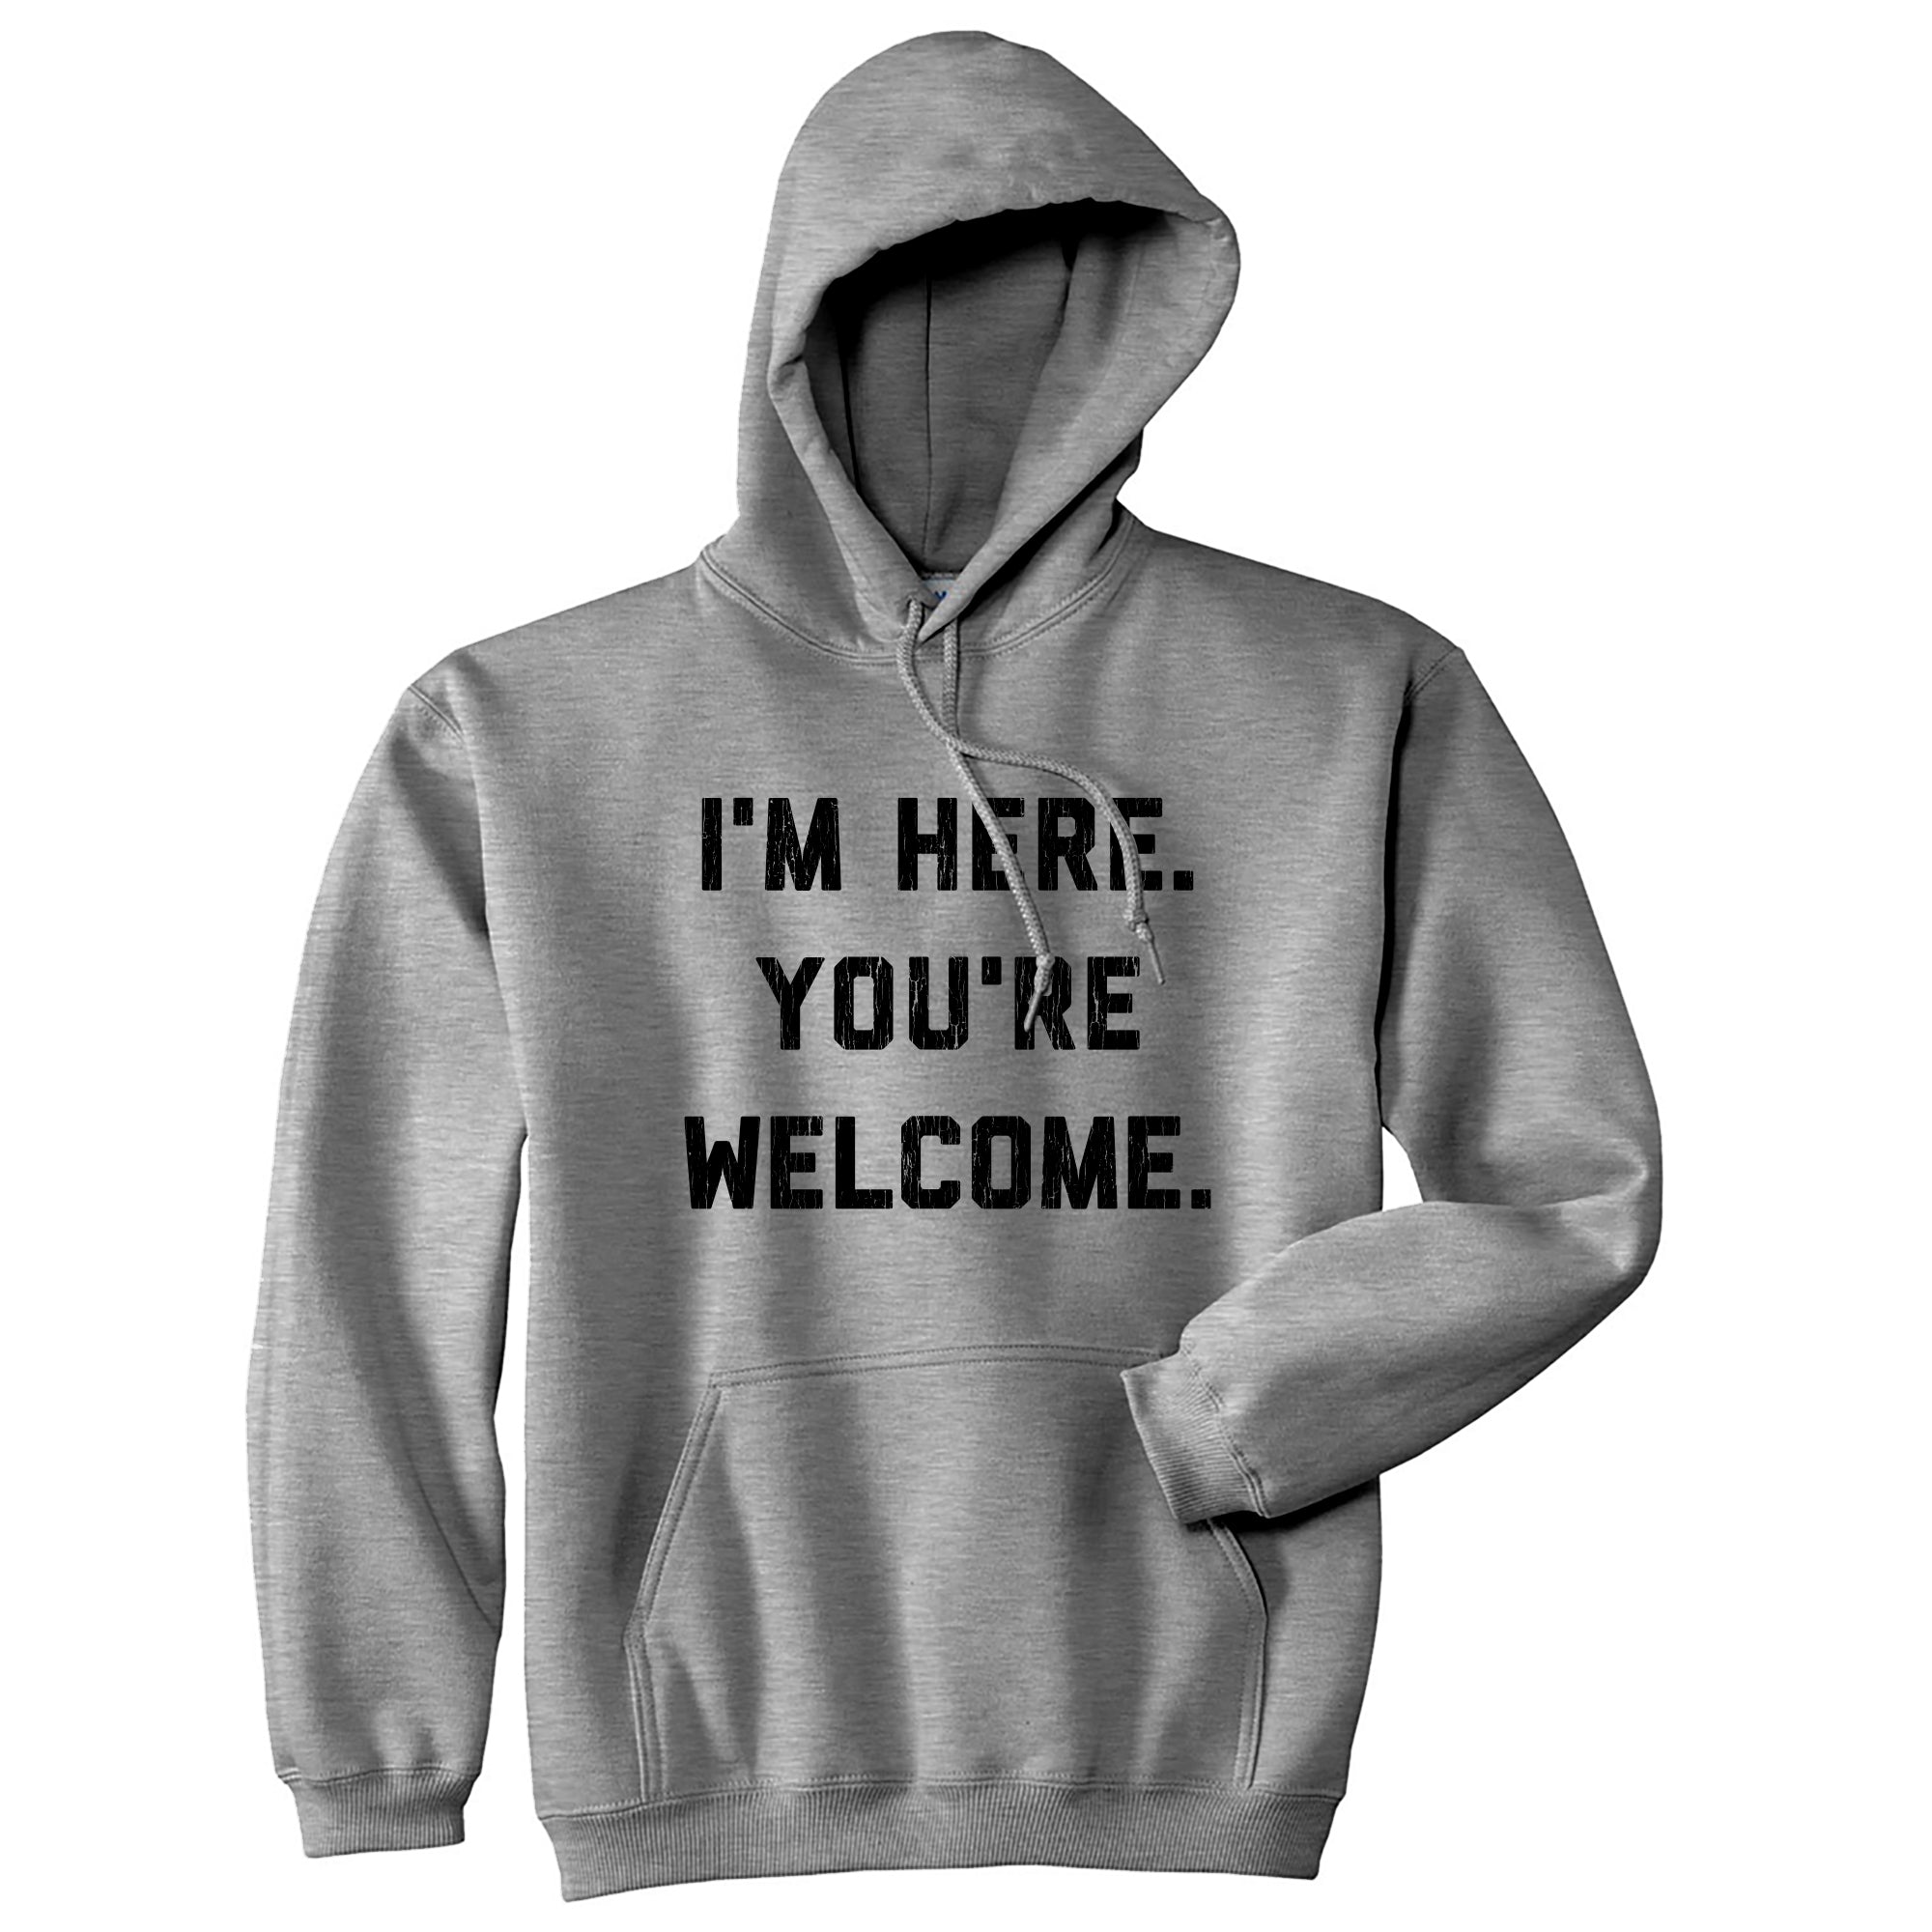 Funny Heather Grey - I'm Here I'm Here. You're Welcome. Hoodie Nerdy Sarcastic Introvert Tee